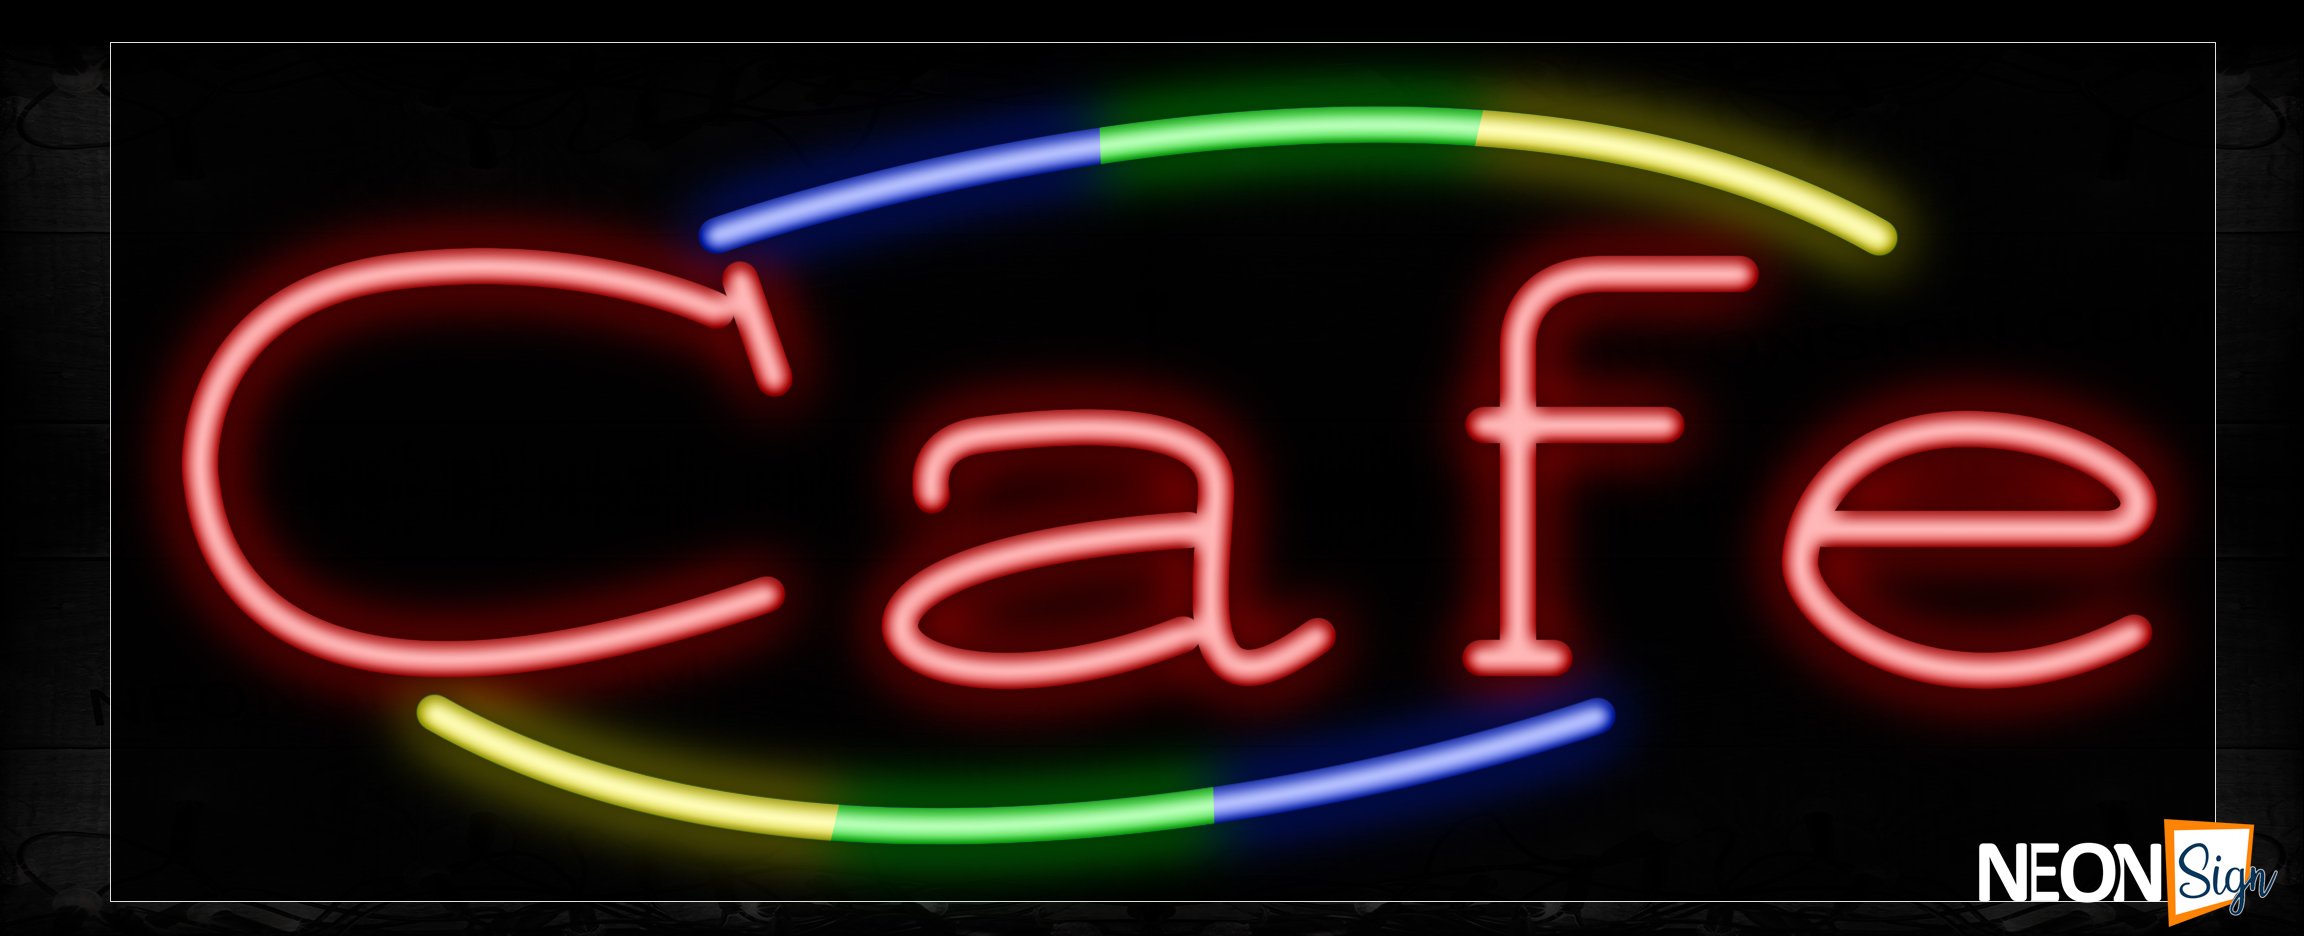 Image of 10755 Cafe in red with colorful arc border Neon Sign_13x32 Black Backing